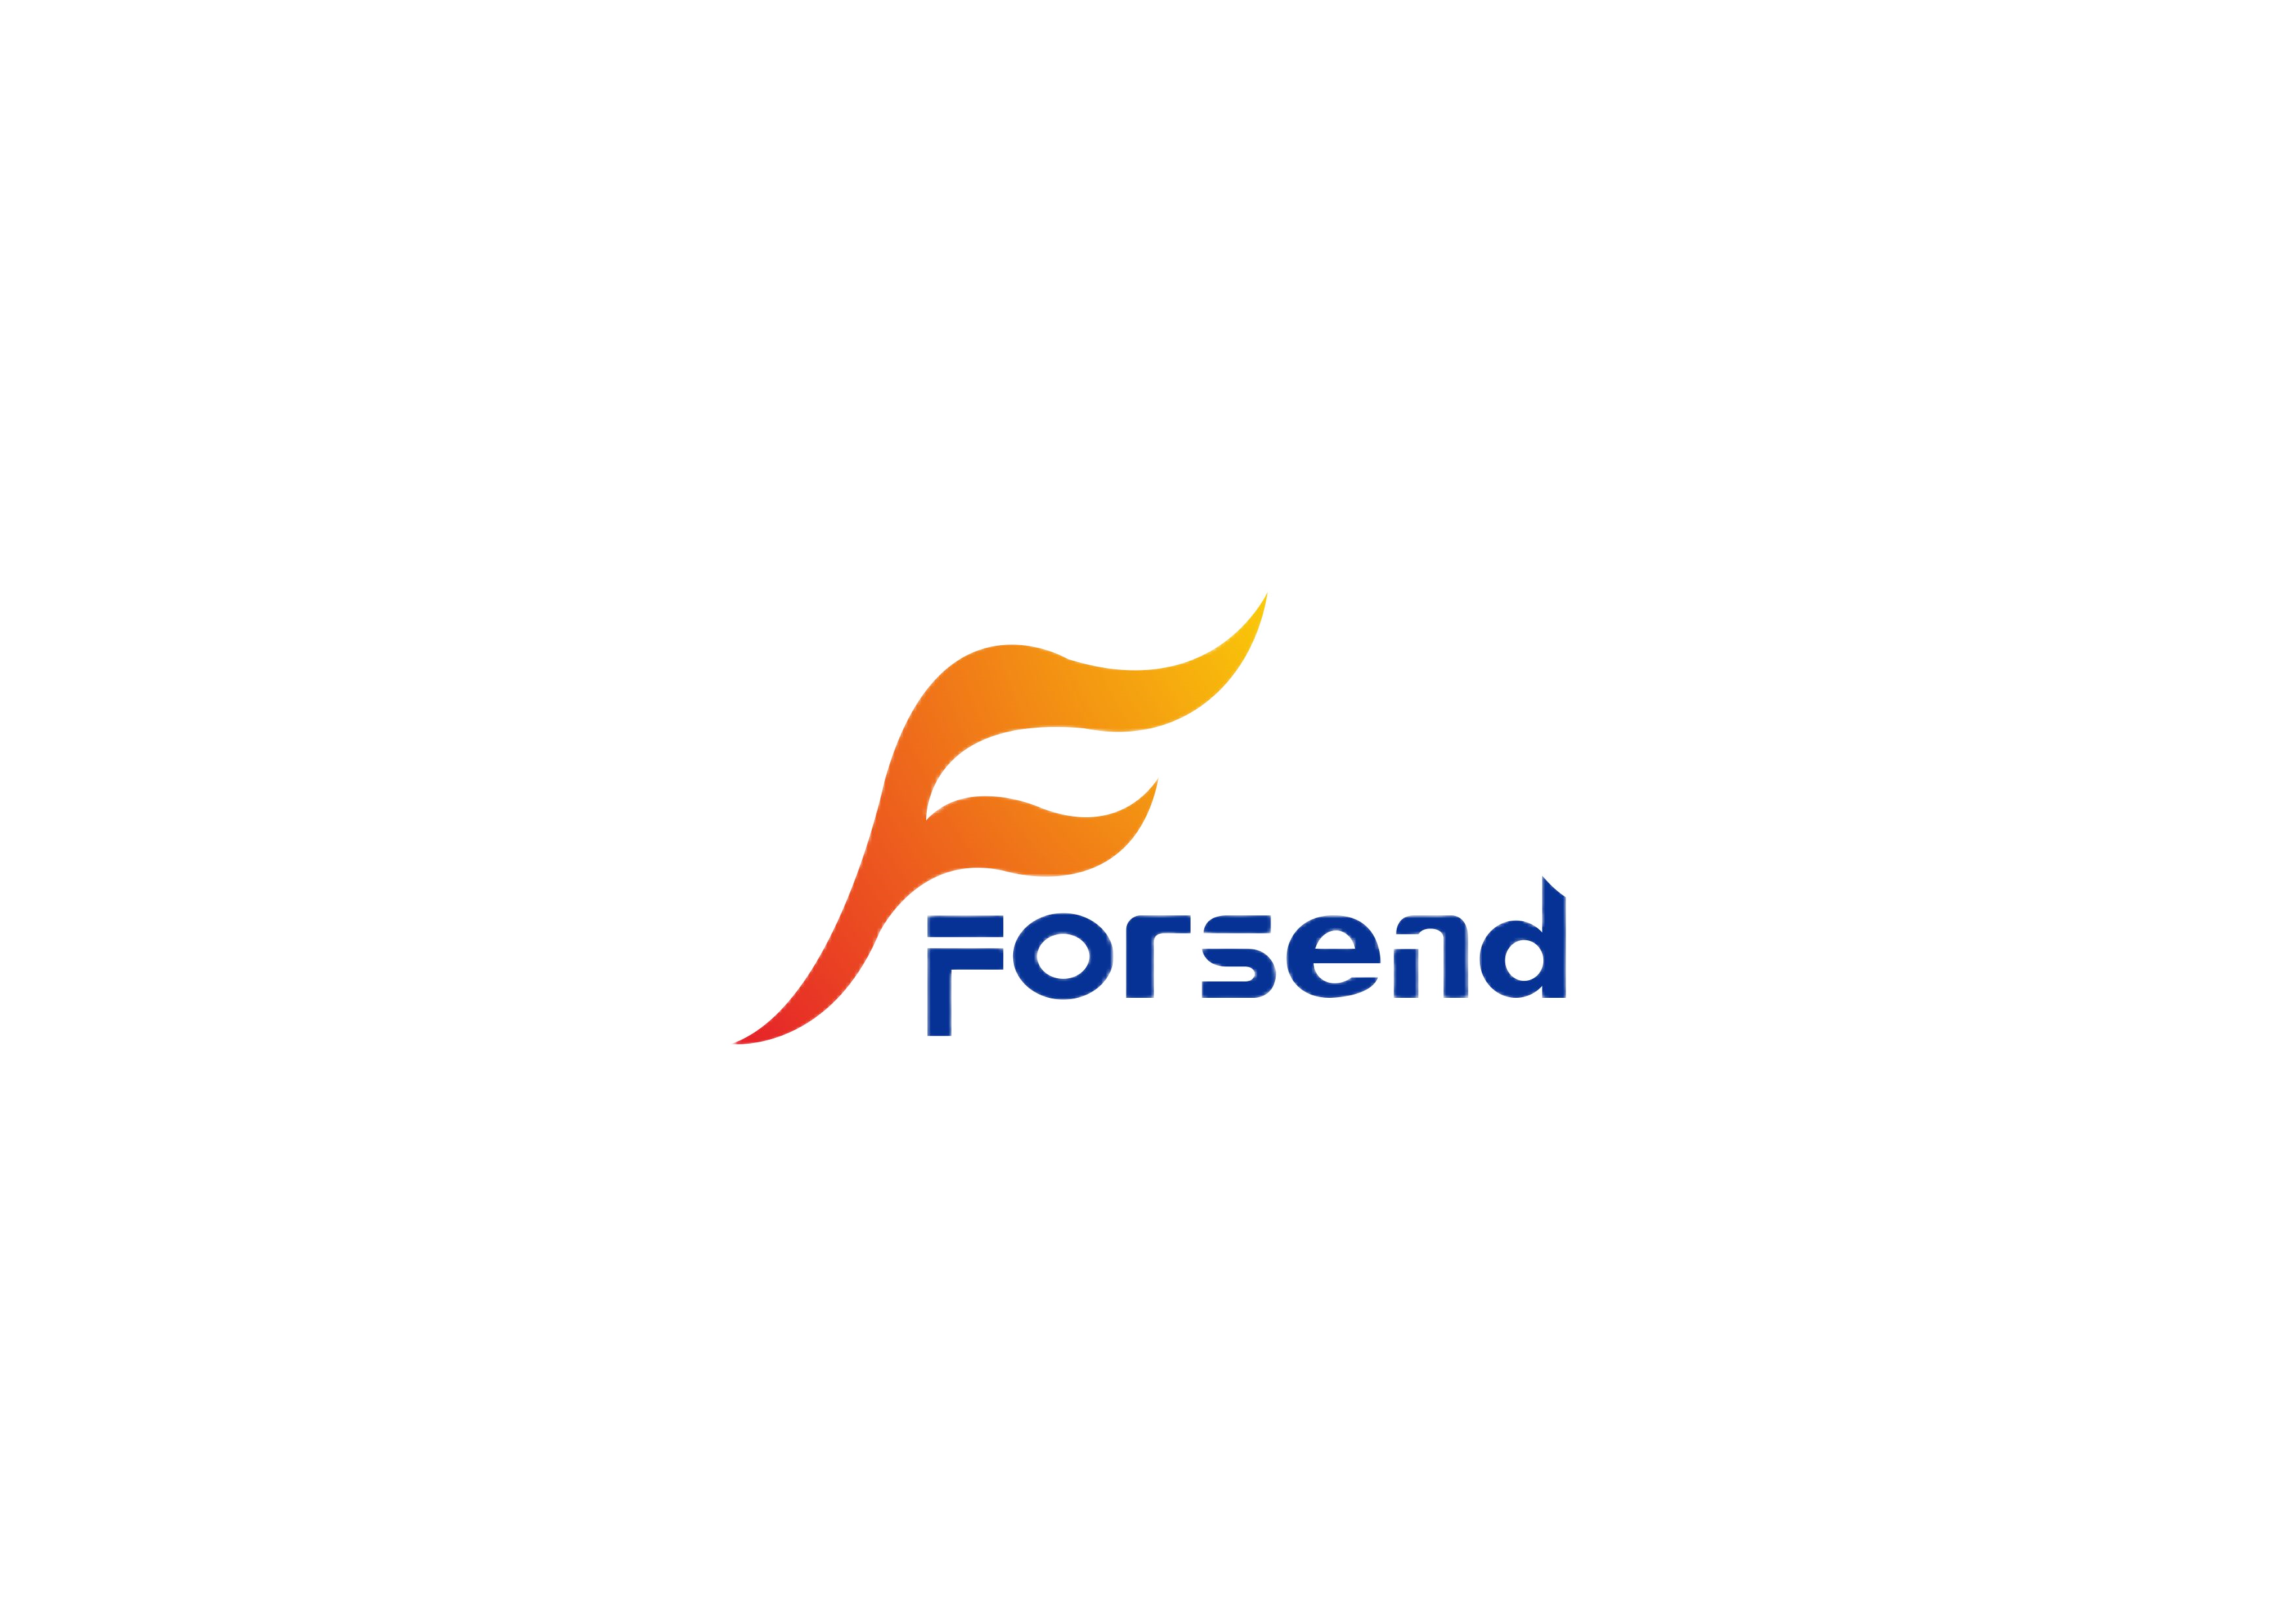 Forsend